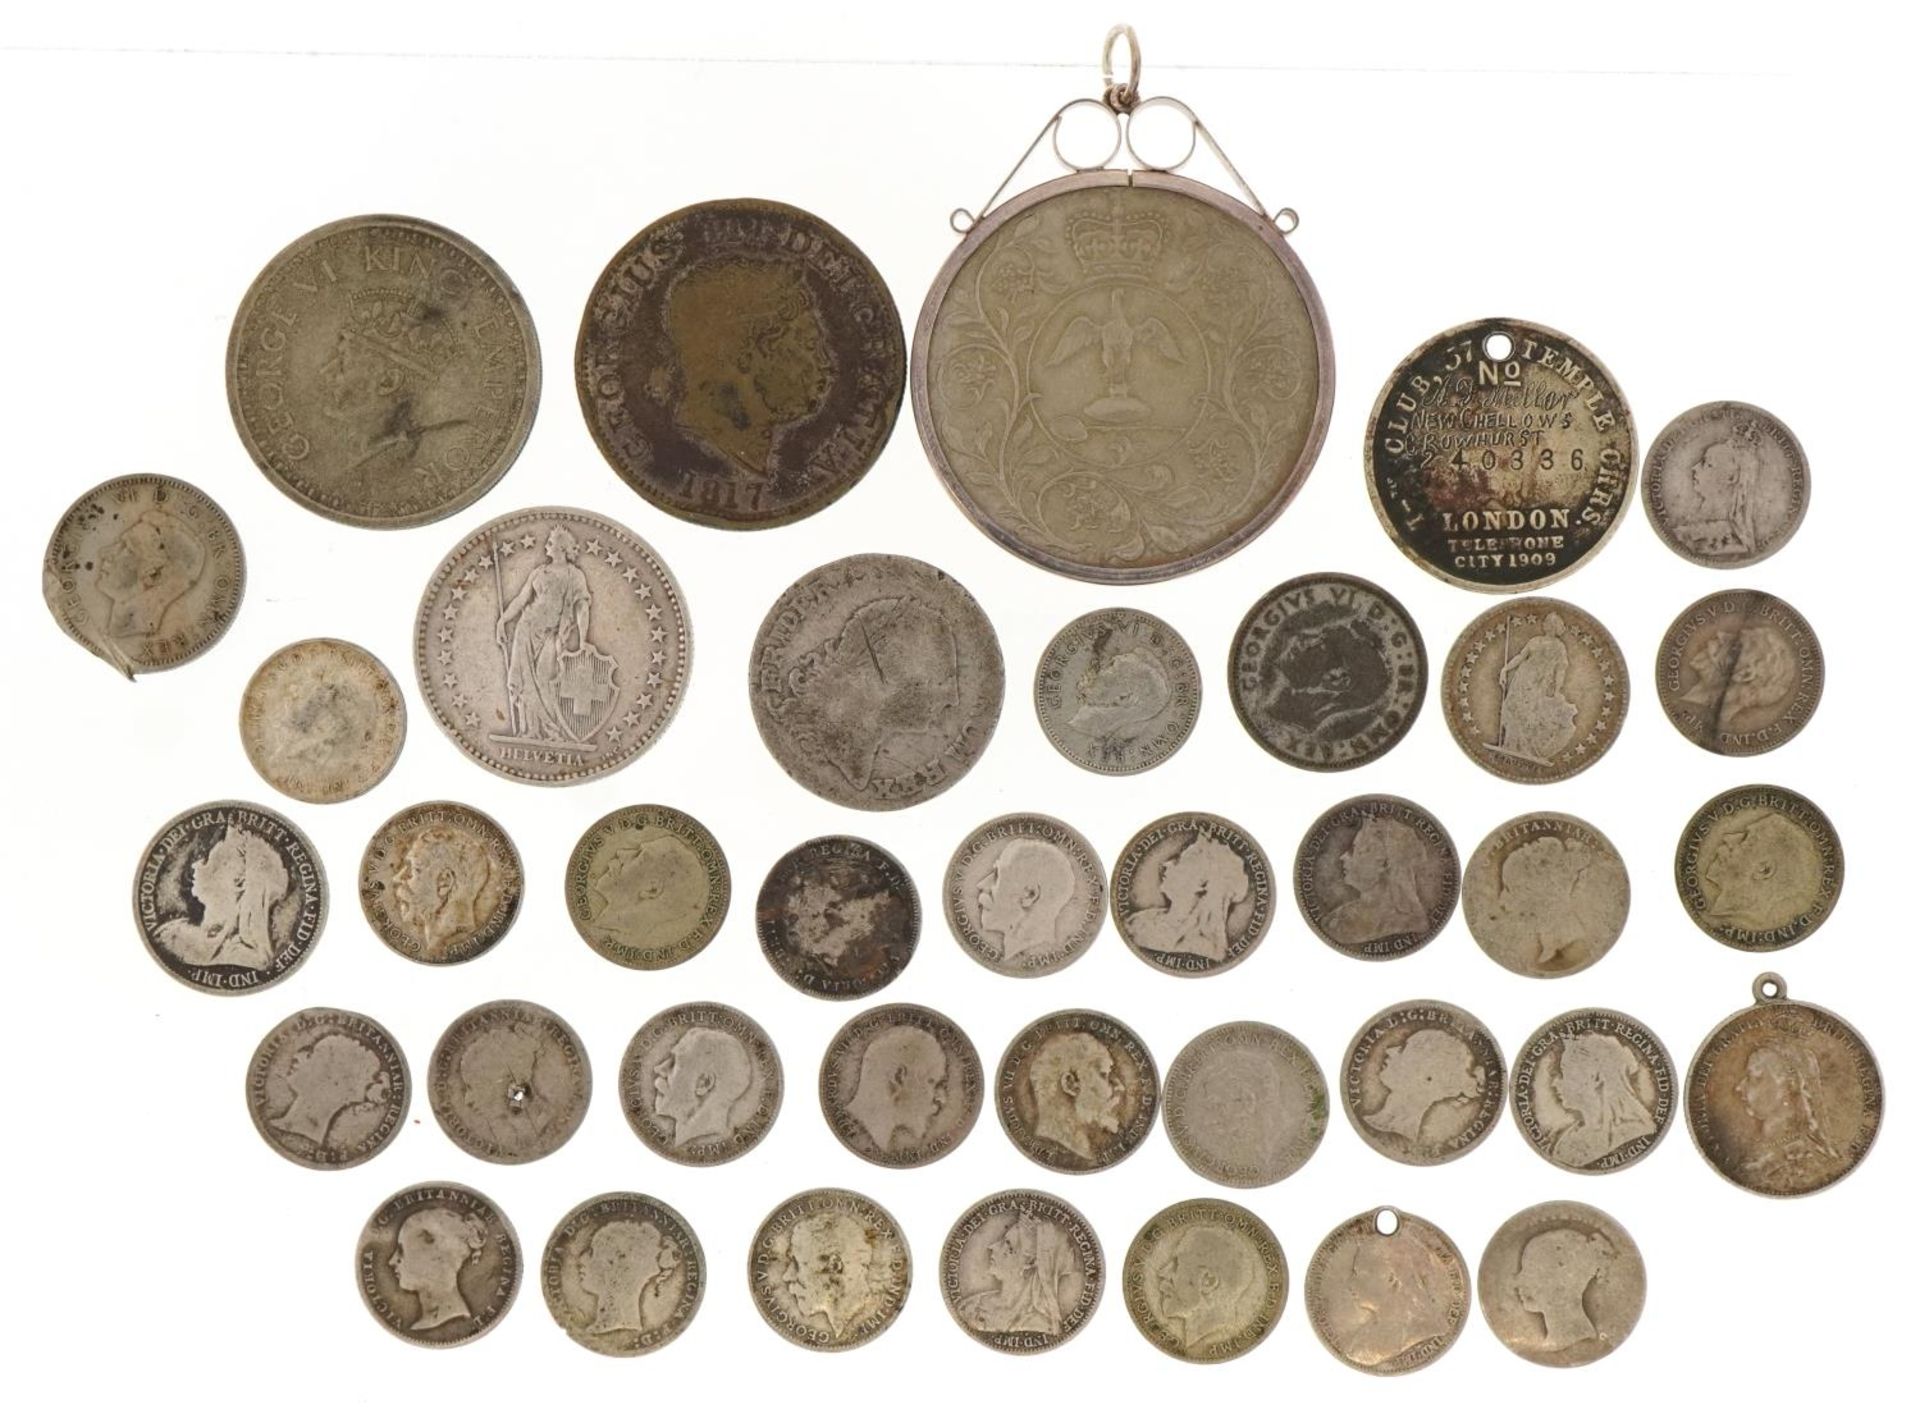 Antique and later British and world coinage, some silver, including 1977 commemorative crown with - Image 4 of 6